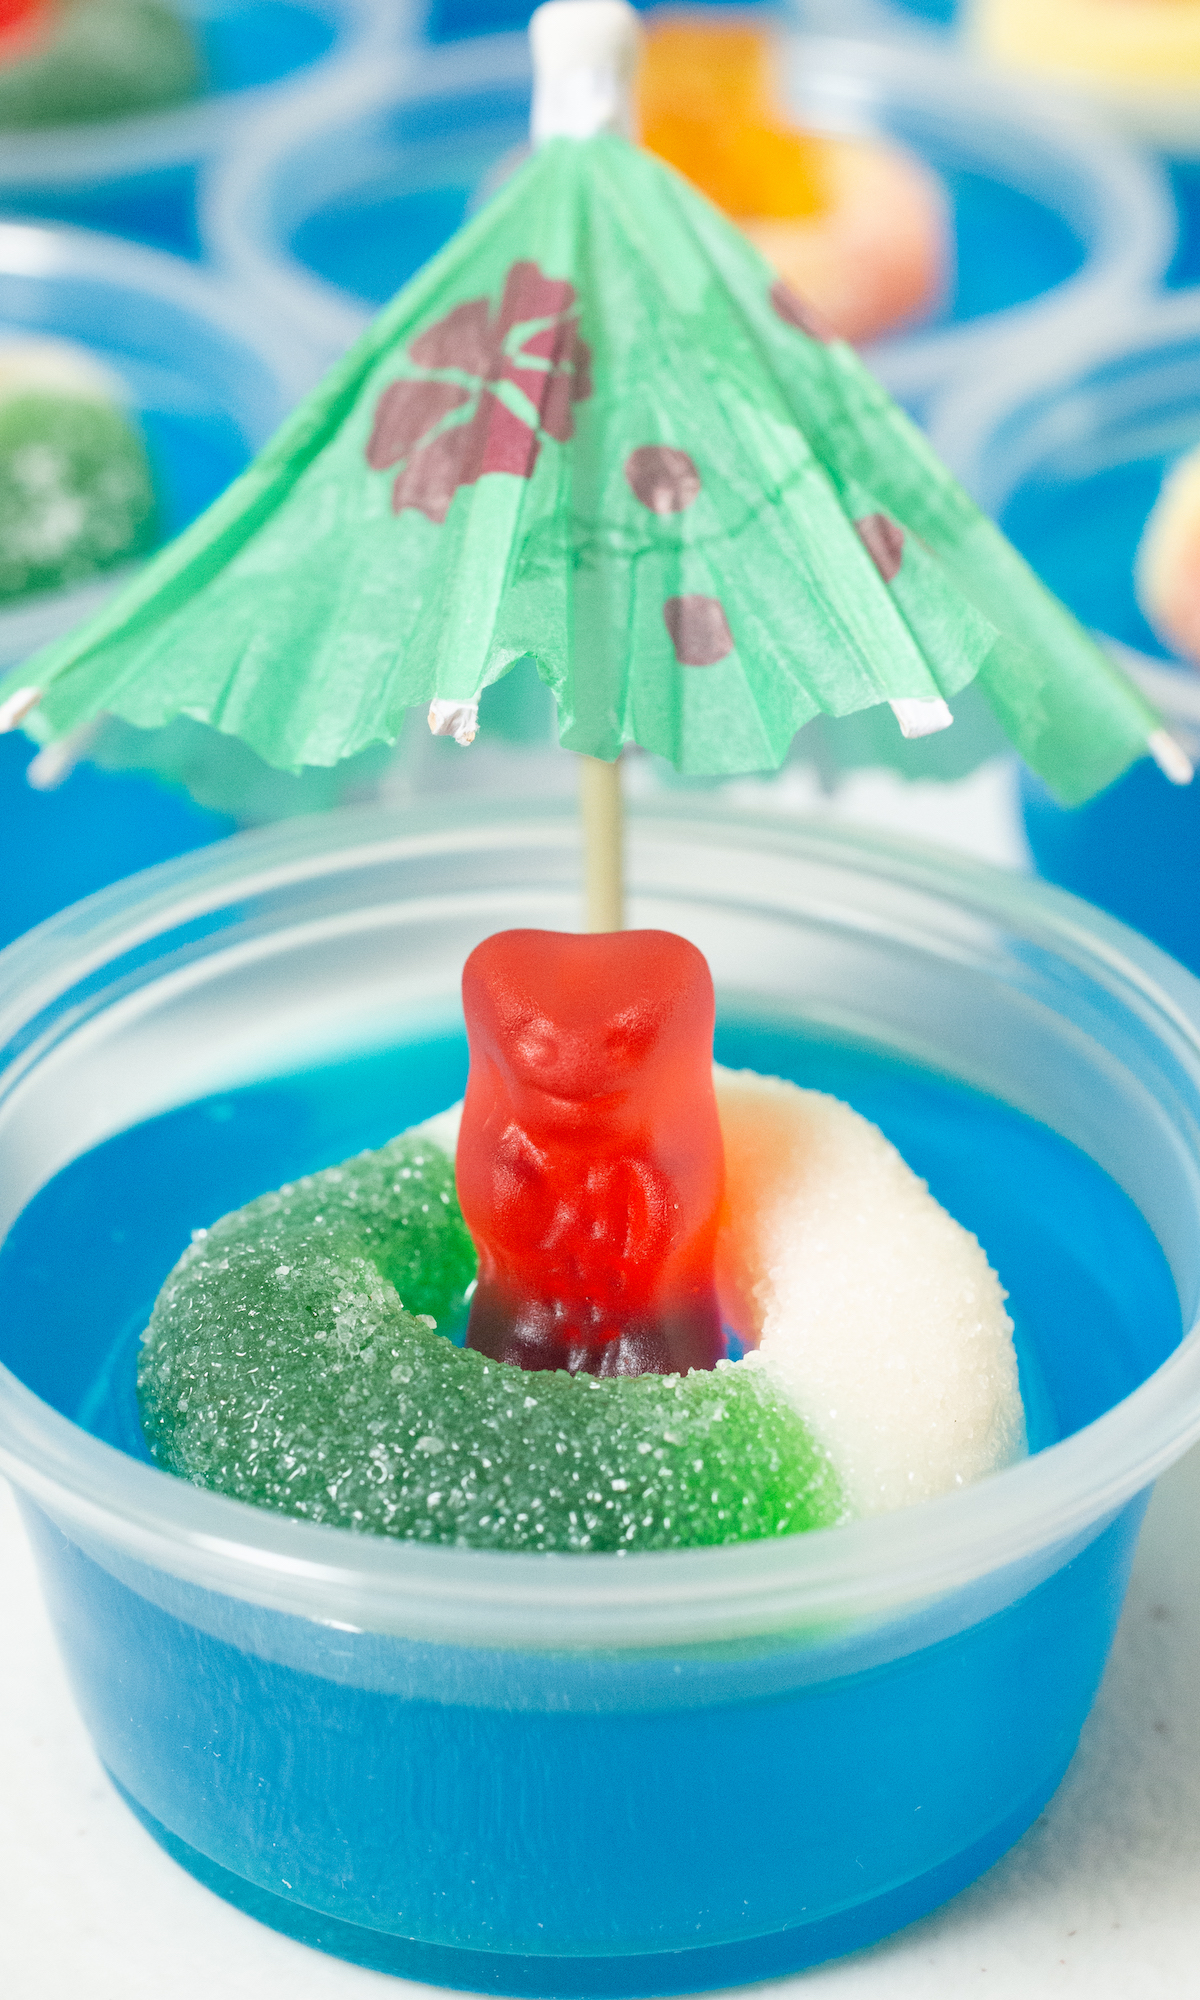 A single 2 oz plastic container filled with a blue jello shot that's topped with a gummy bear inside a gummy ring and garnished with a cocktail umbrella.